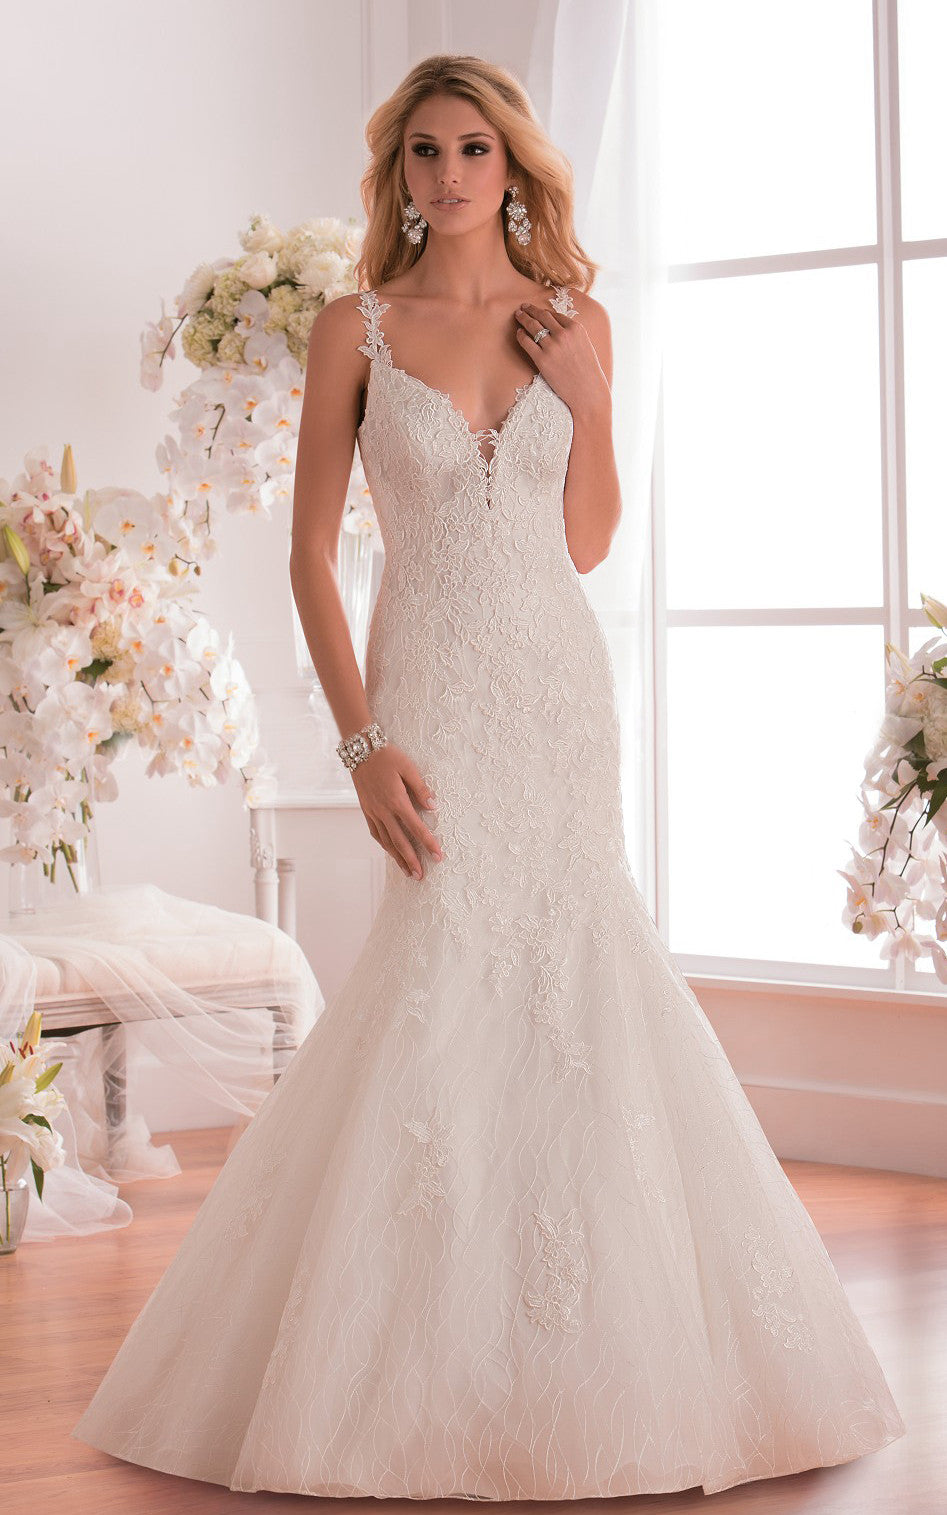 V-Neck Mermaid Wedding Dress With Low Scoop Back And Appliques